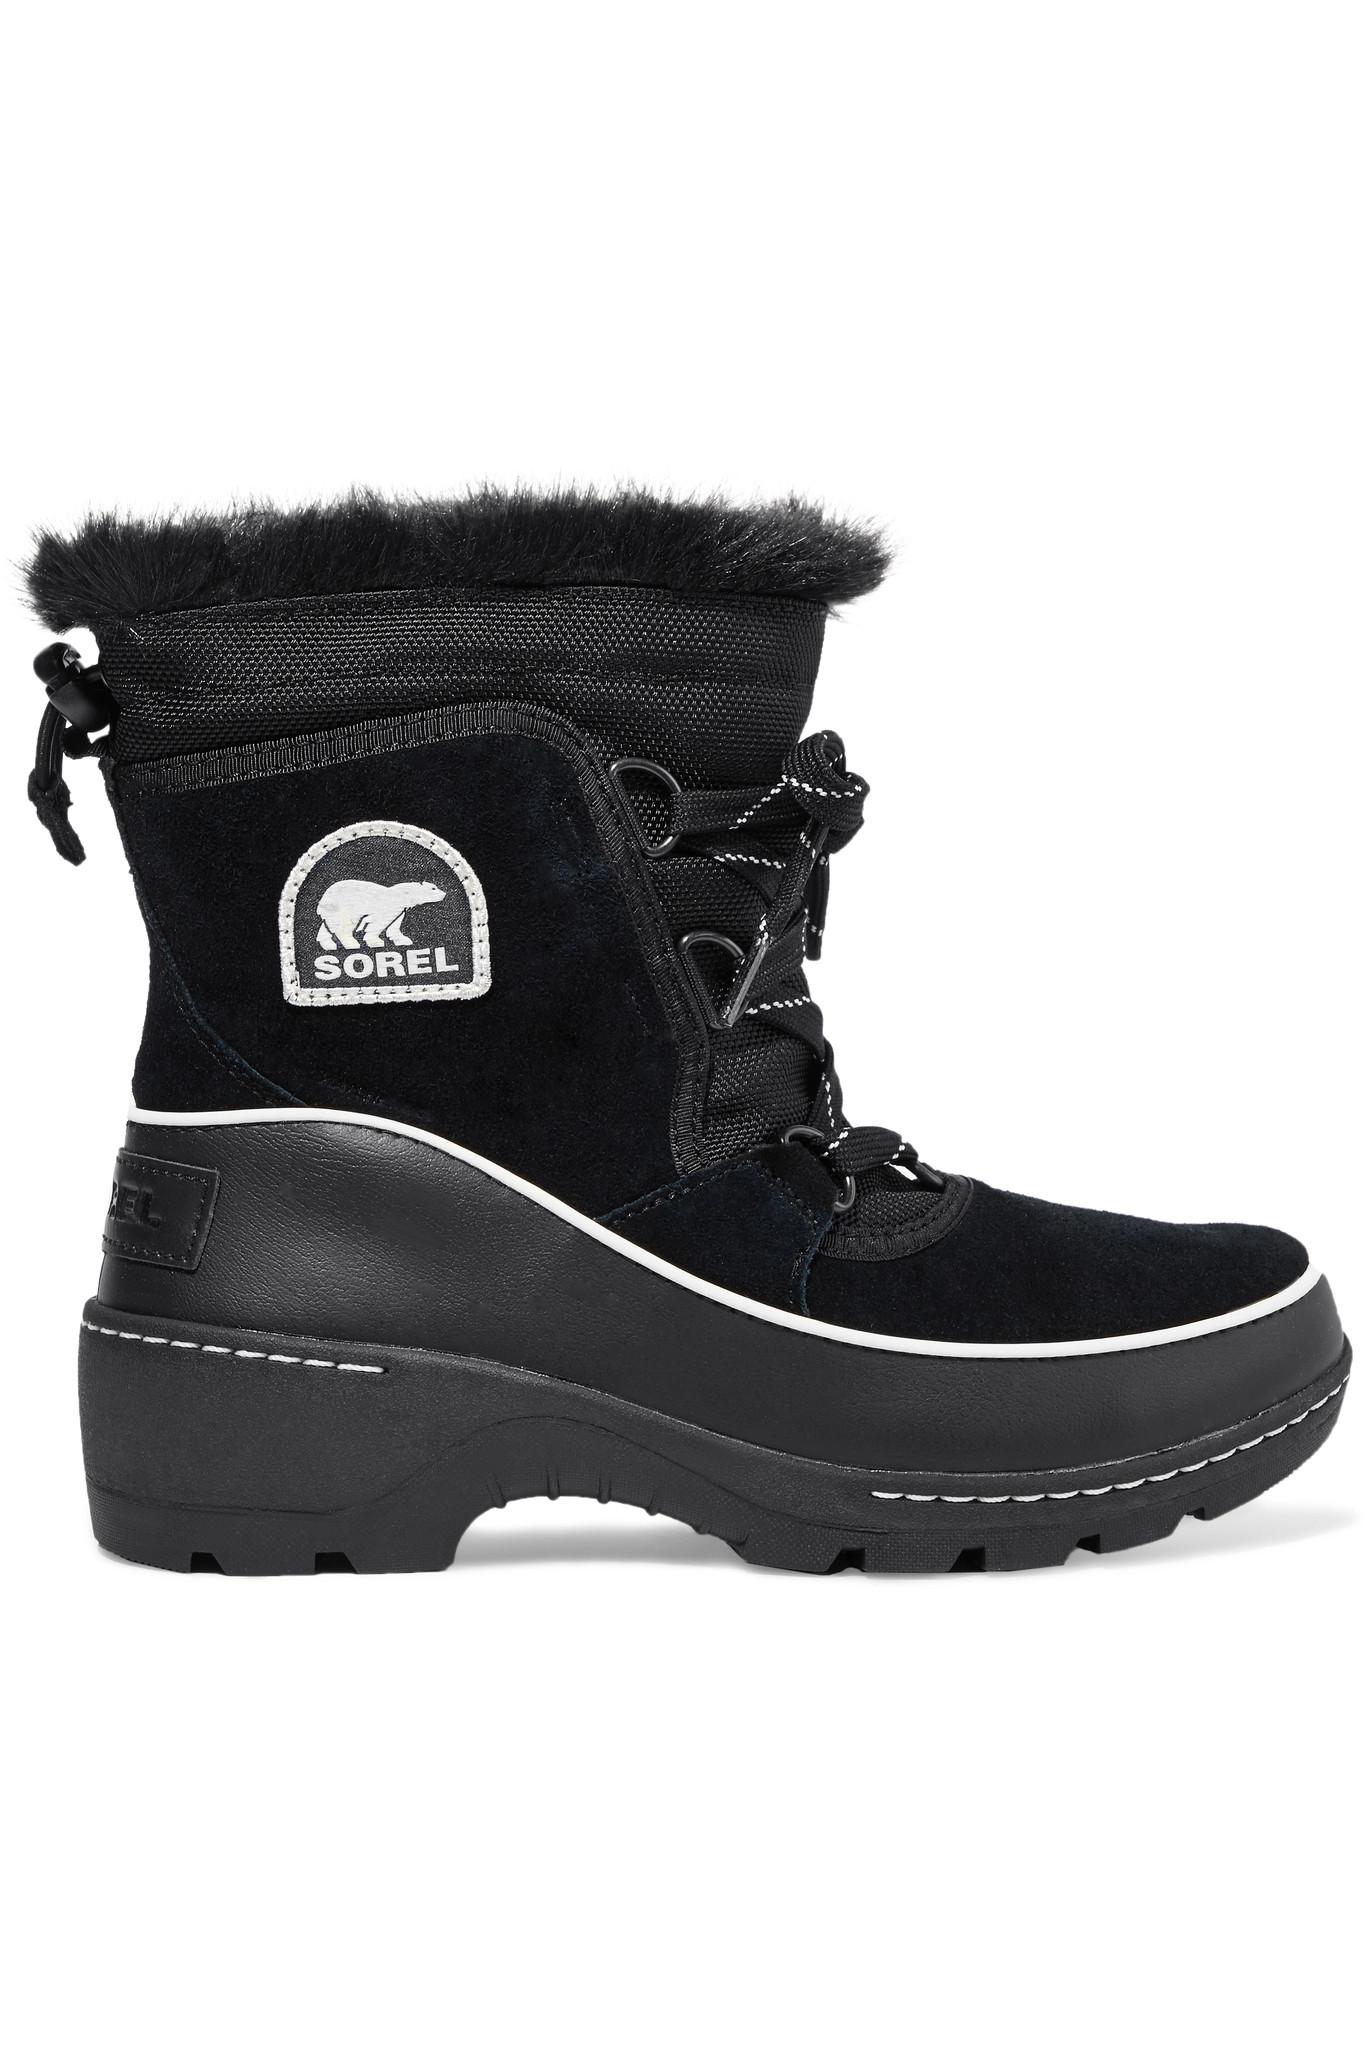 Lyst - Sorel Torino Faux Fur-trimmed Waterproof Suede, Shell And ...